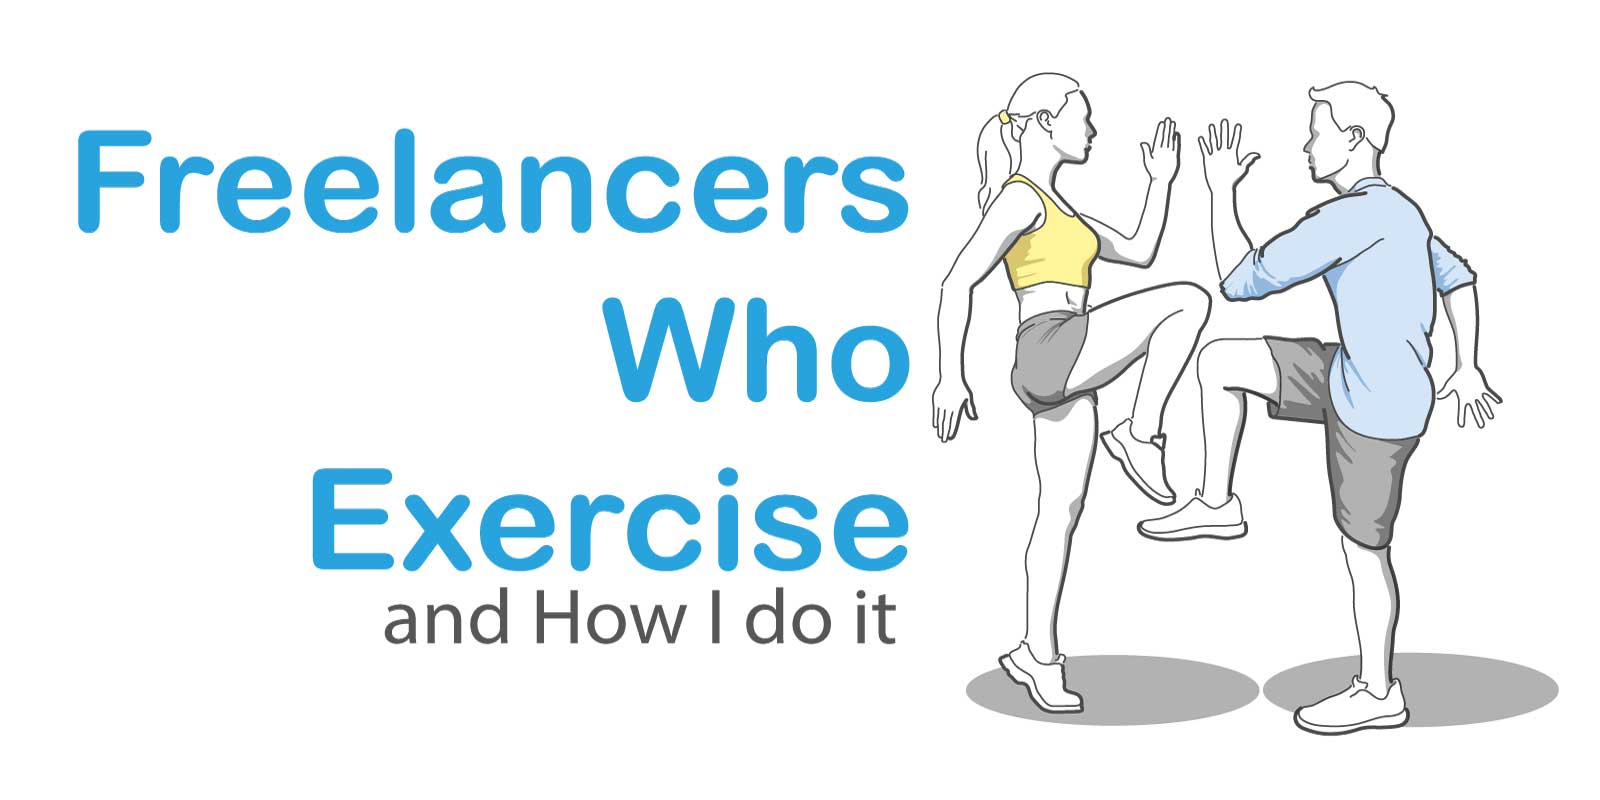 Freelancers Who Exercise, and how I do it